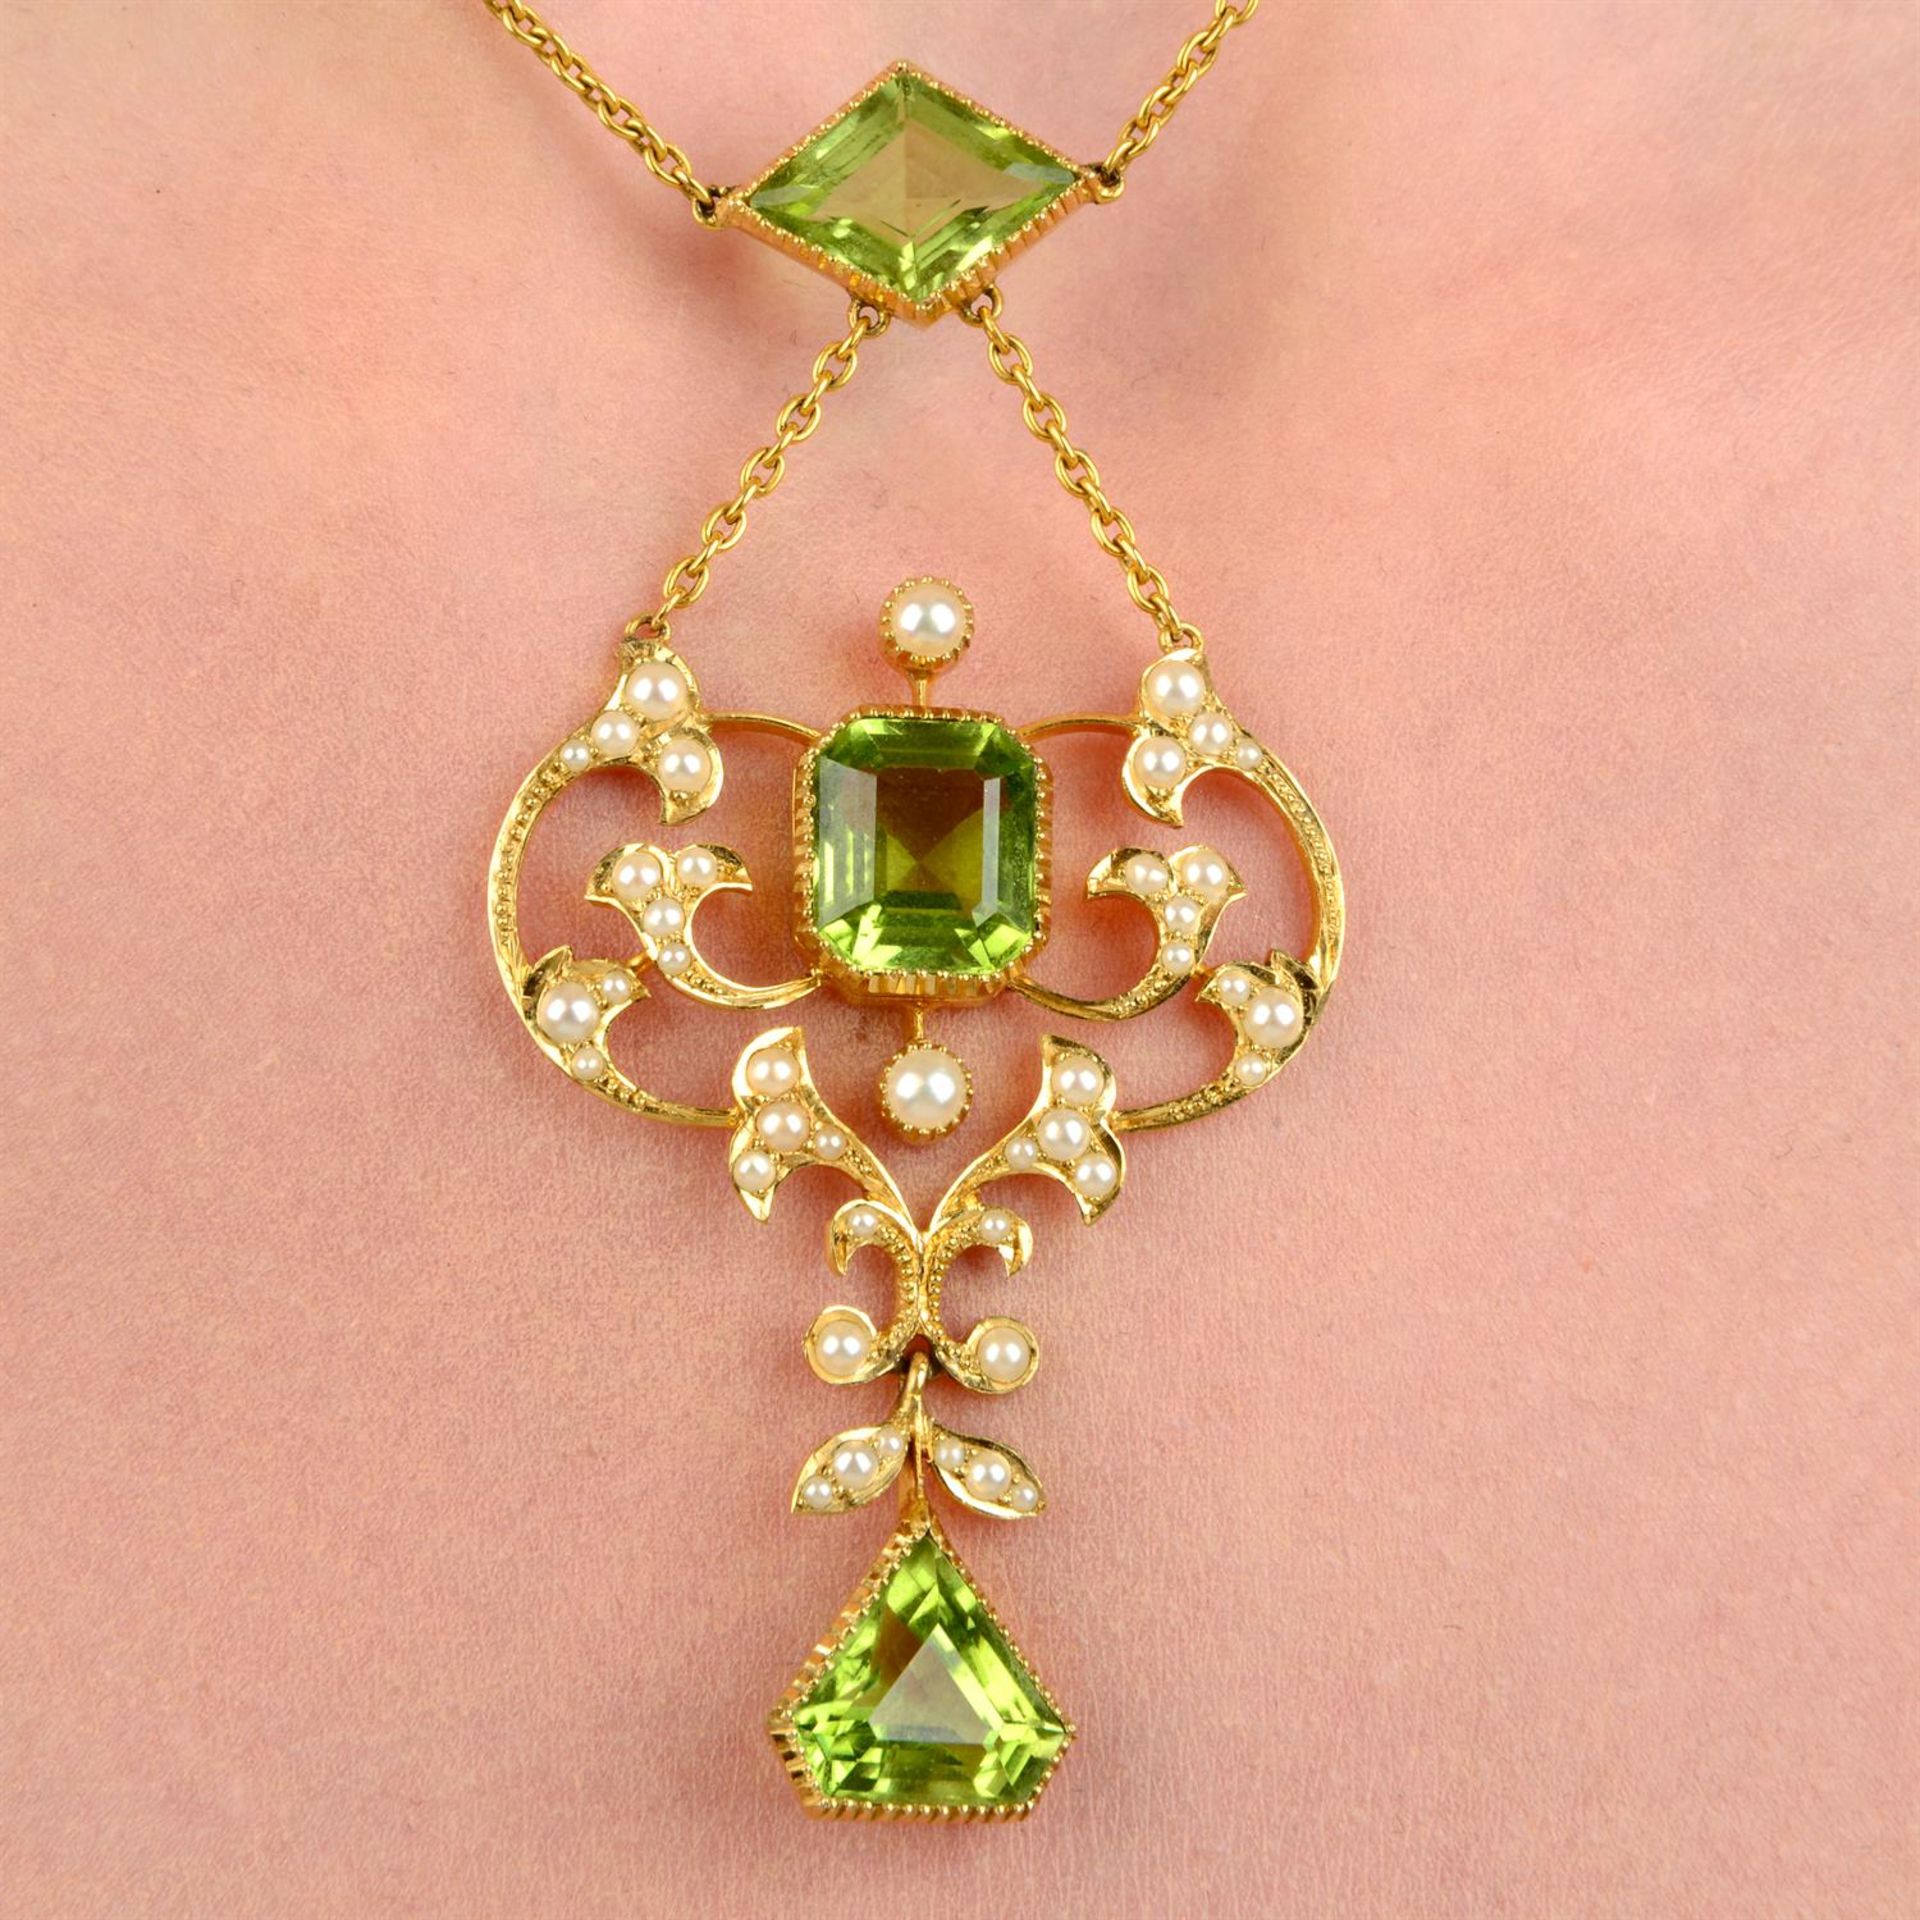 An Edwardian 15ct gold peridot and split pearl pendant necklace, with fitted case.